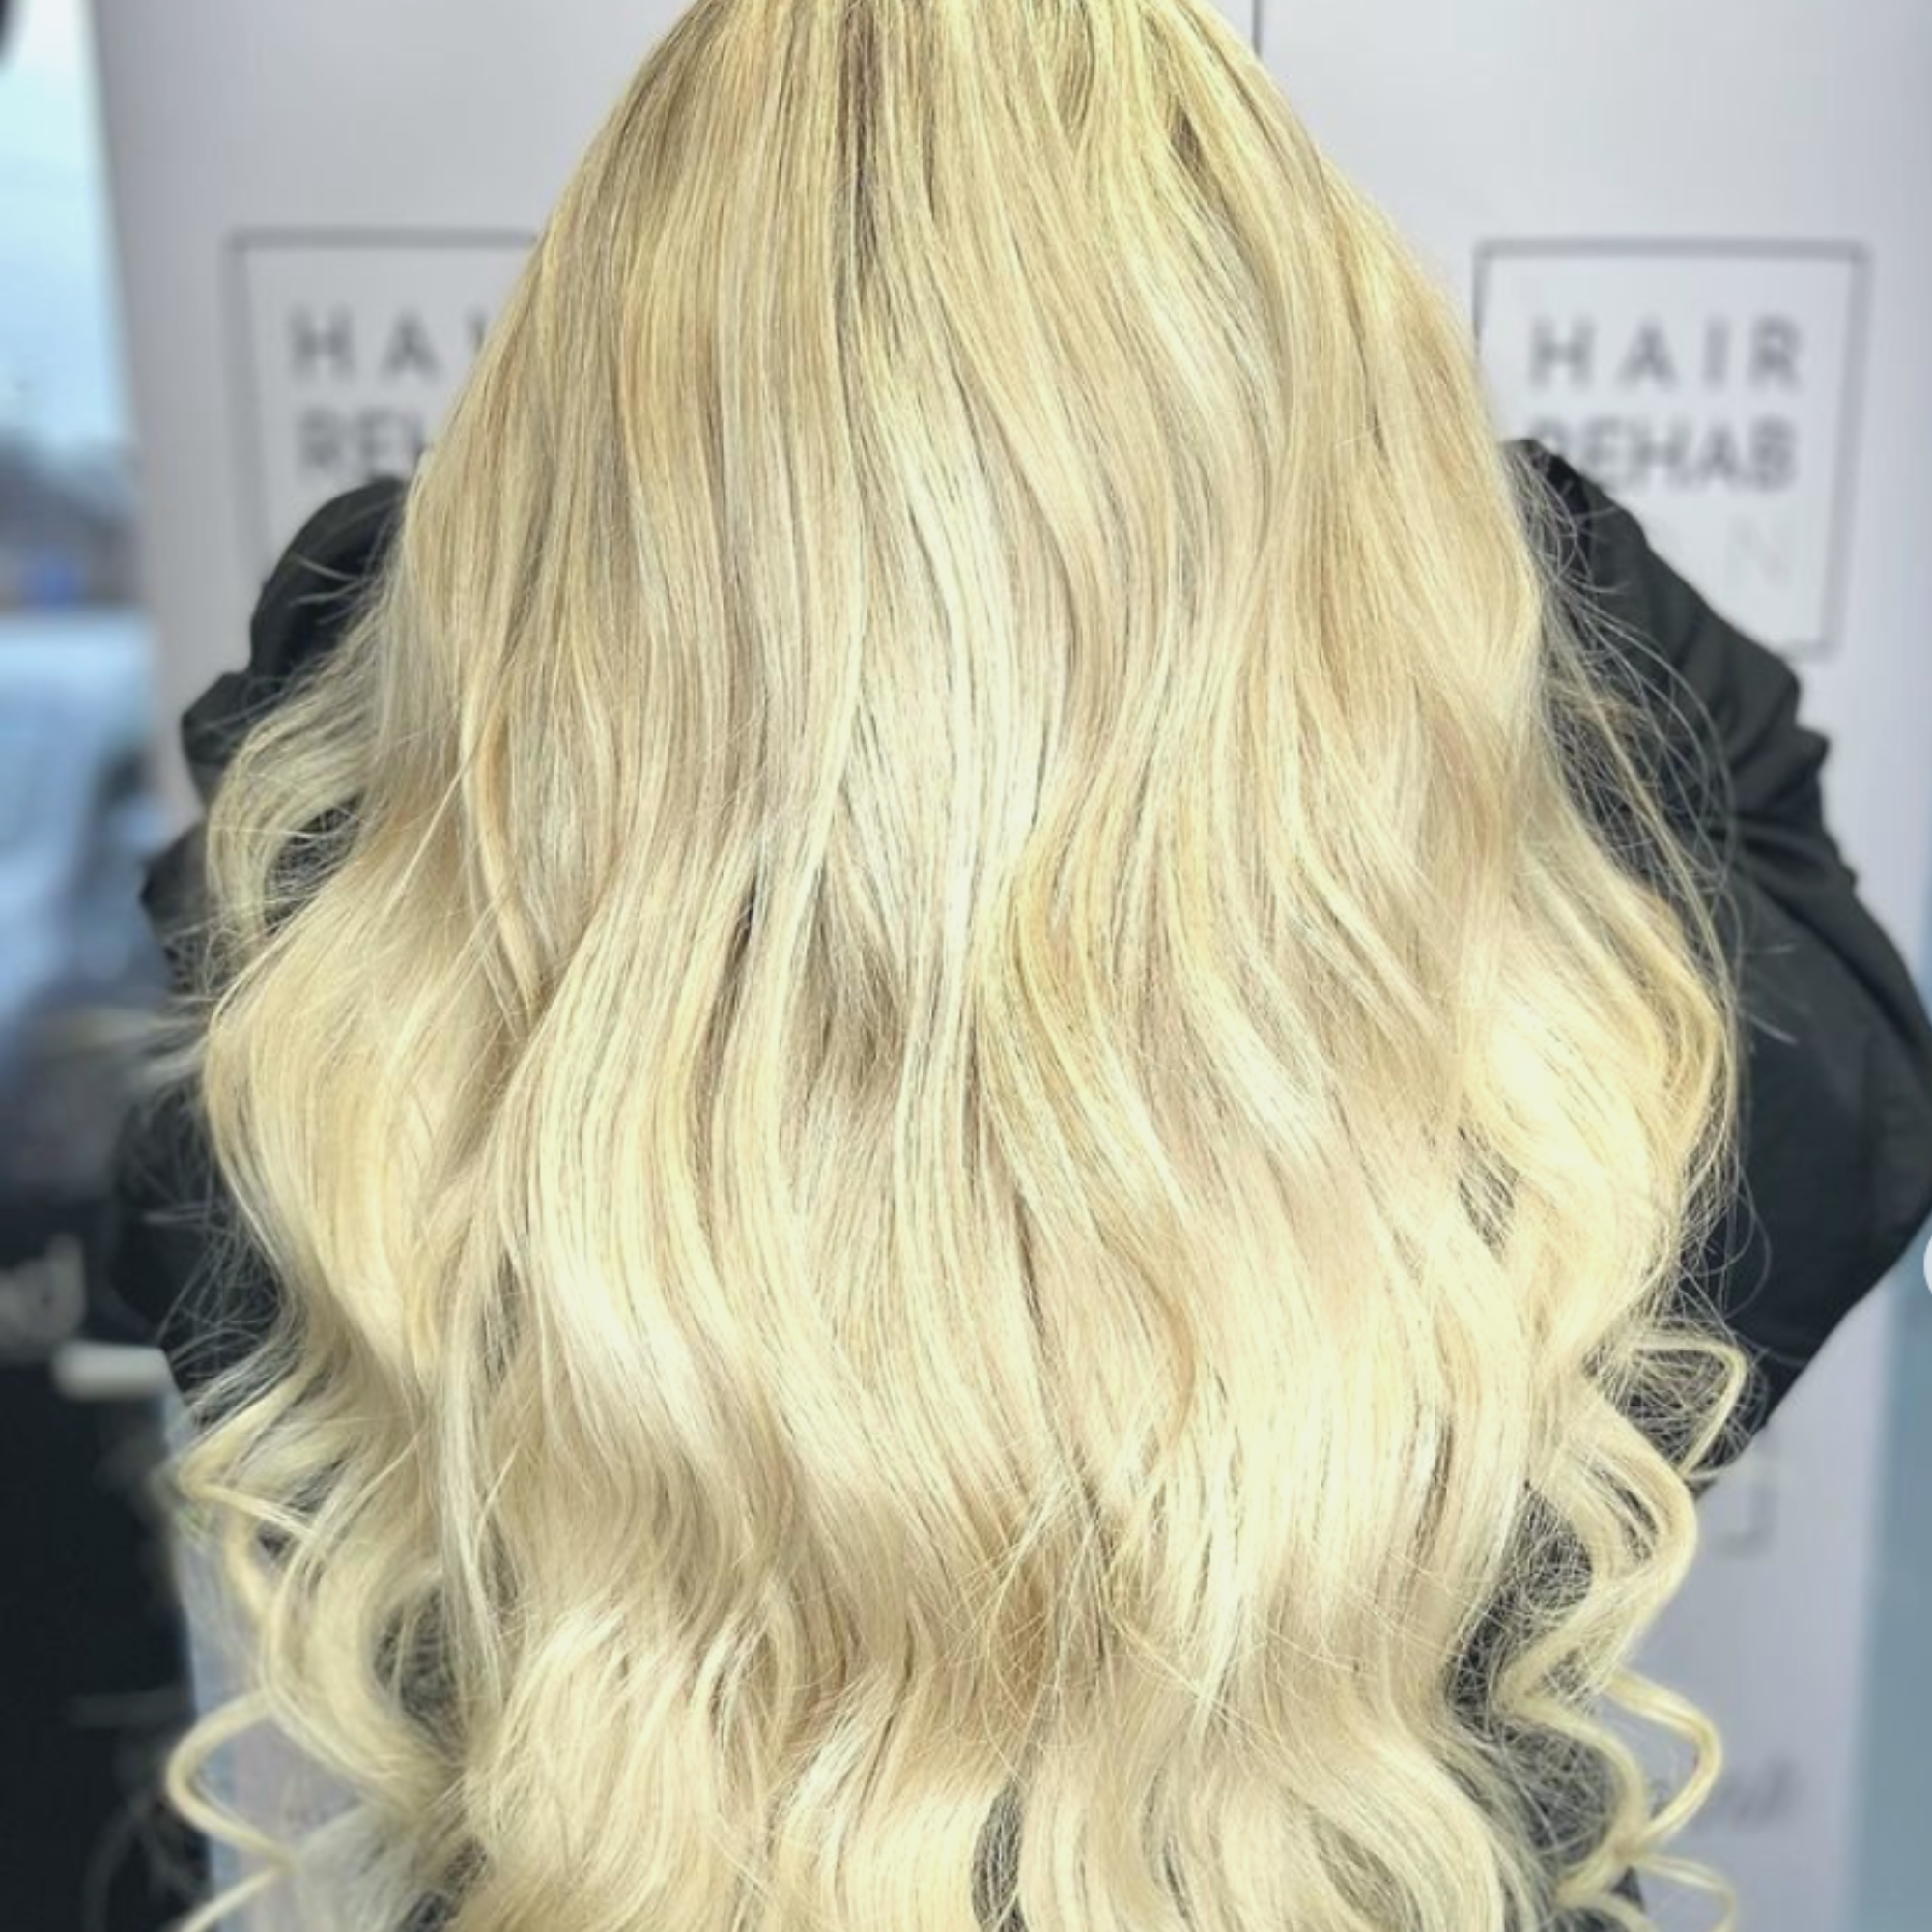 "customer wearing hair rehab london 24 inch ultimate clip-in hair extensions in blonde shade"